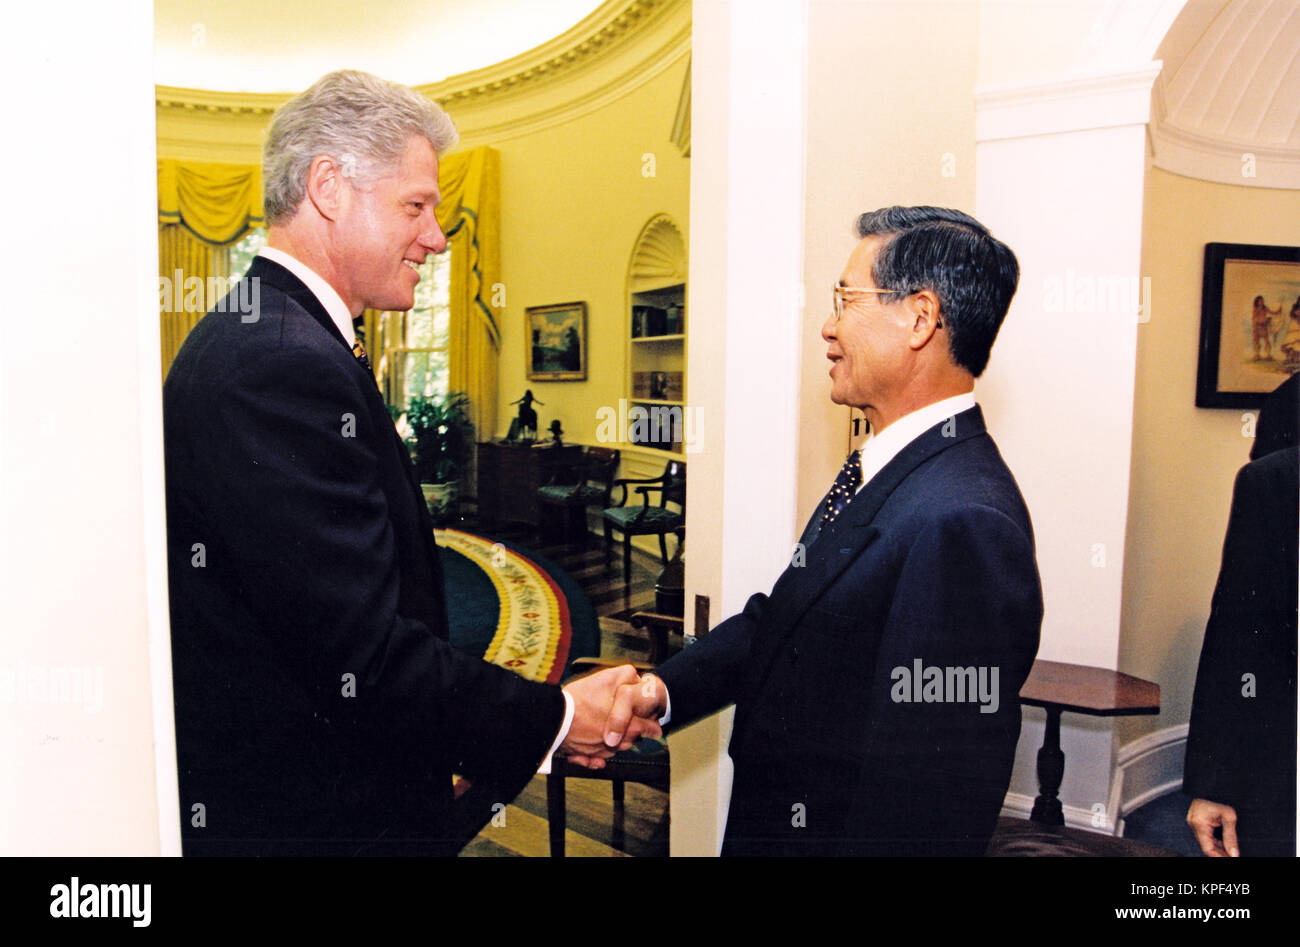 United States President Bill Clinton meets President Alberto Fujimori of Peru in the Oval Office of the White House in Washington, DC on May 21, 1996. Mandatory Credit: Ralph Alswang / White House via CNP /MediaPunch Stock Photo